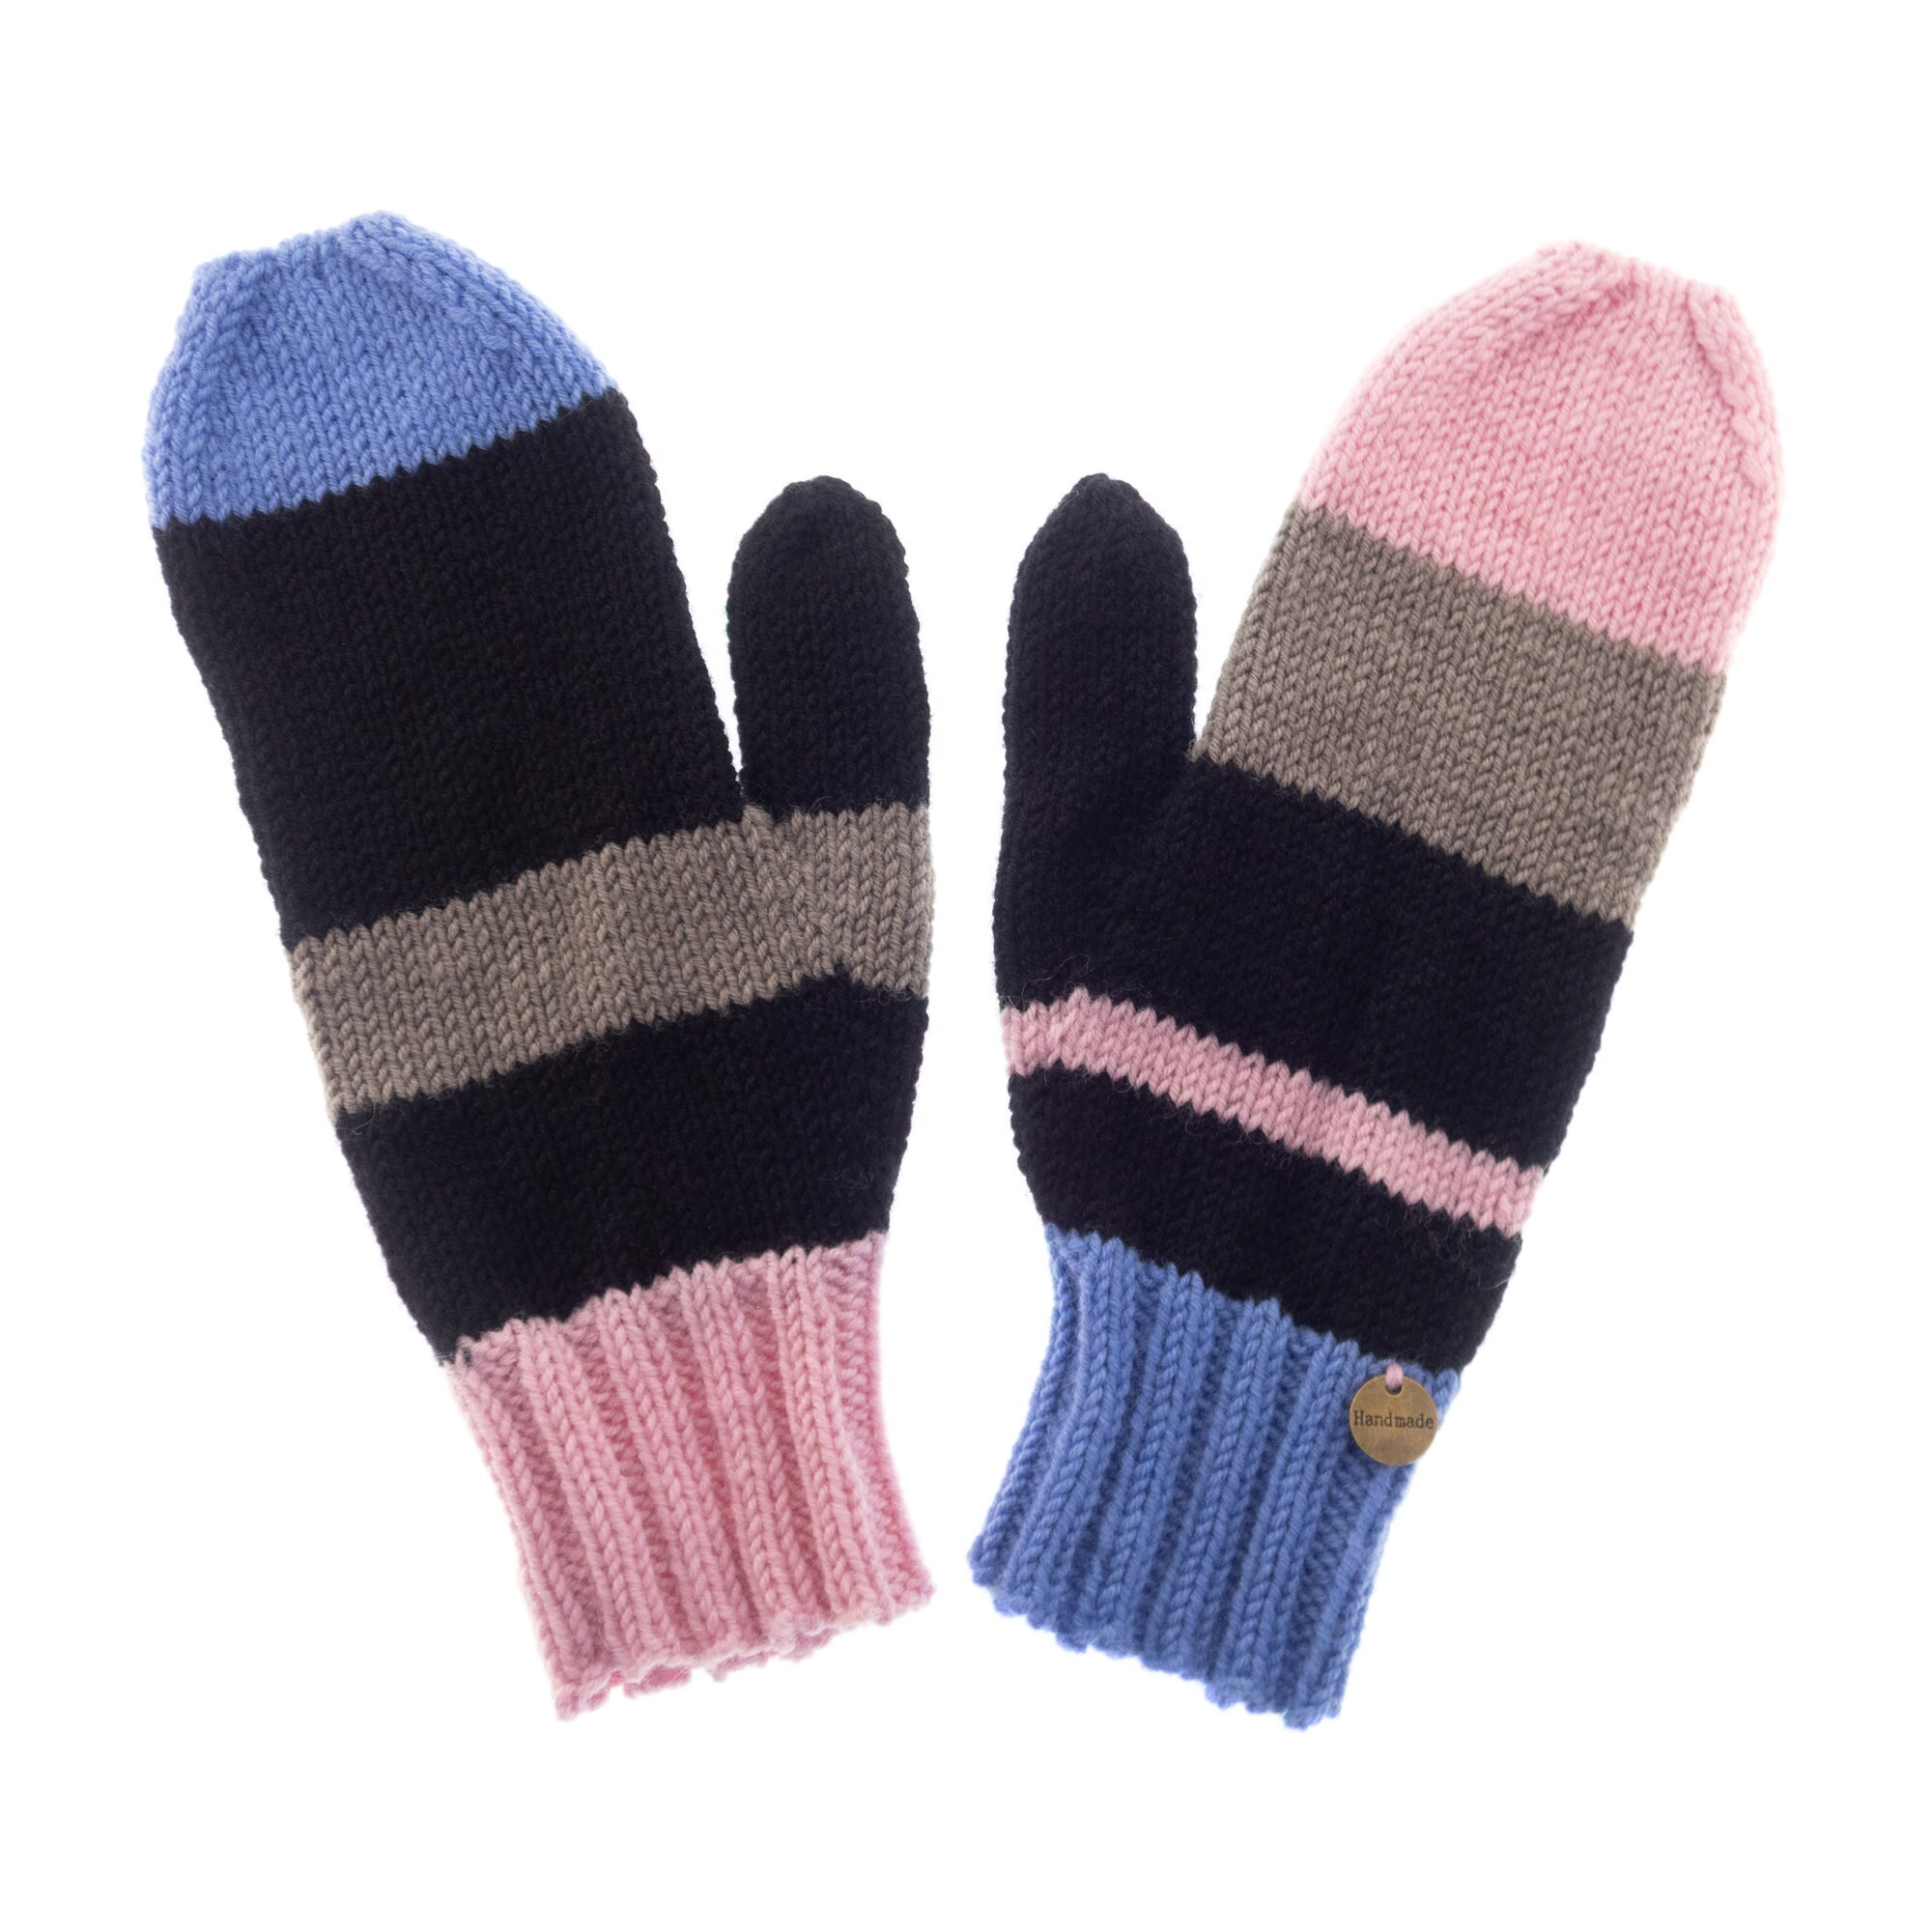 knitted mittens gloves for women